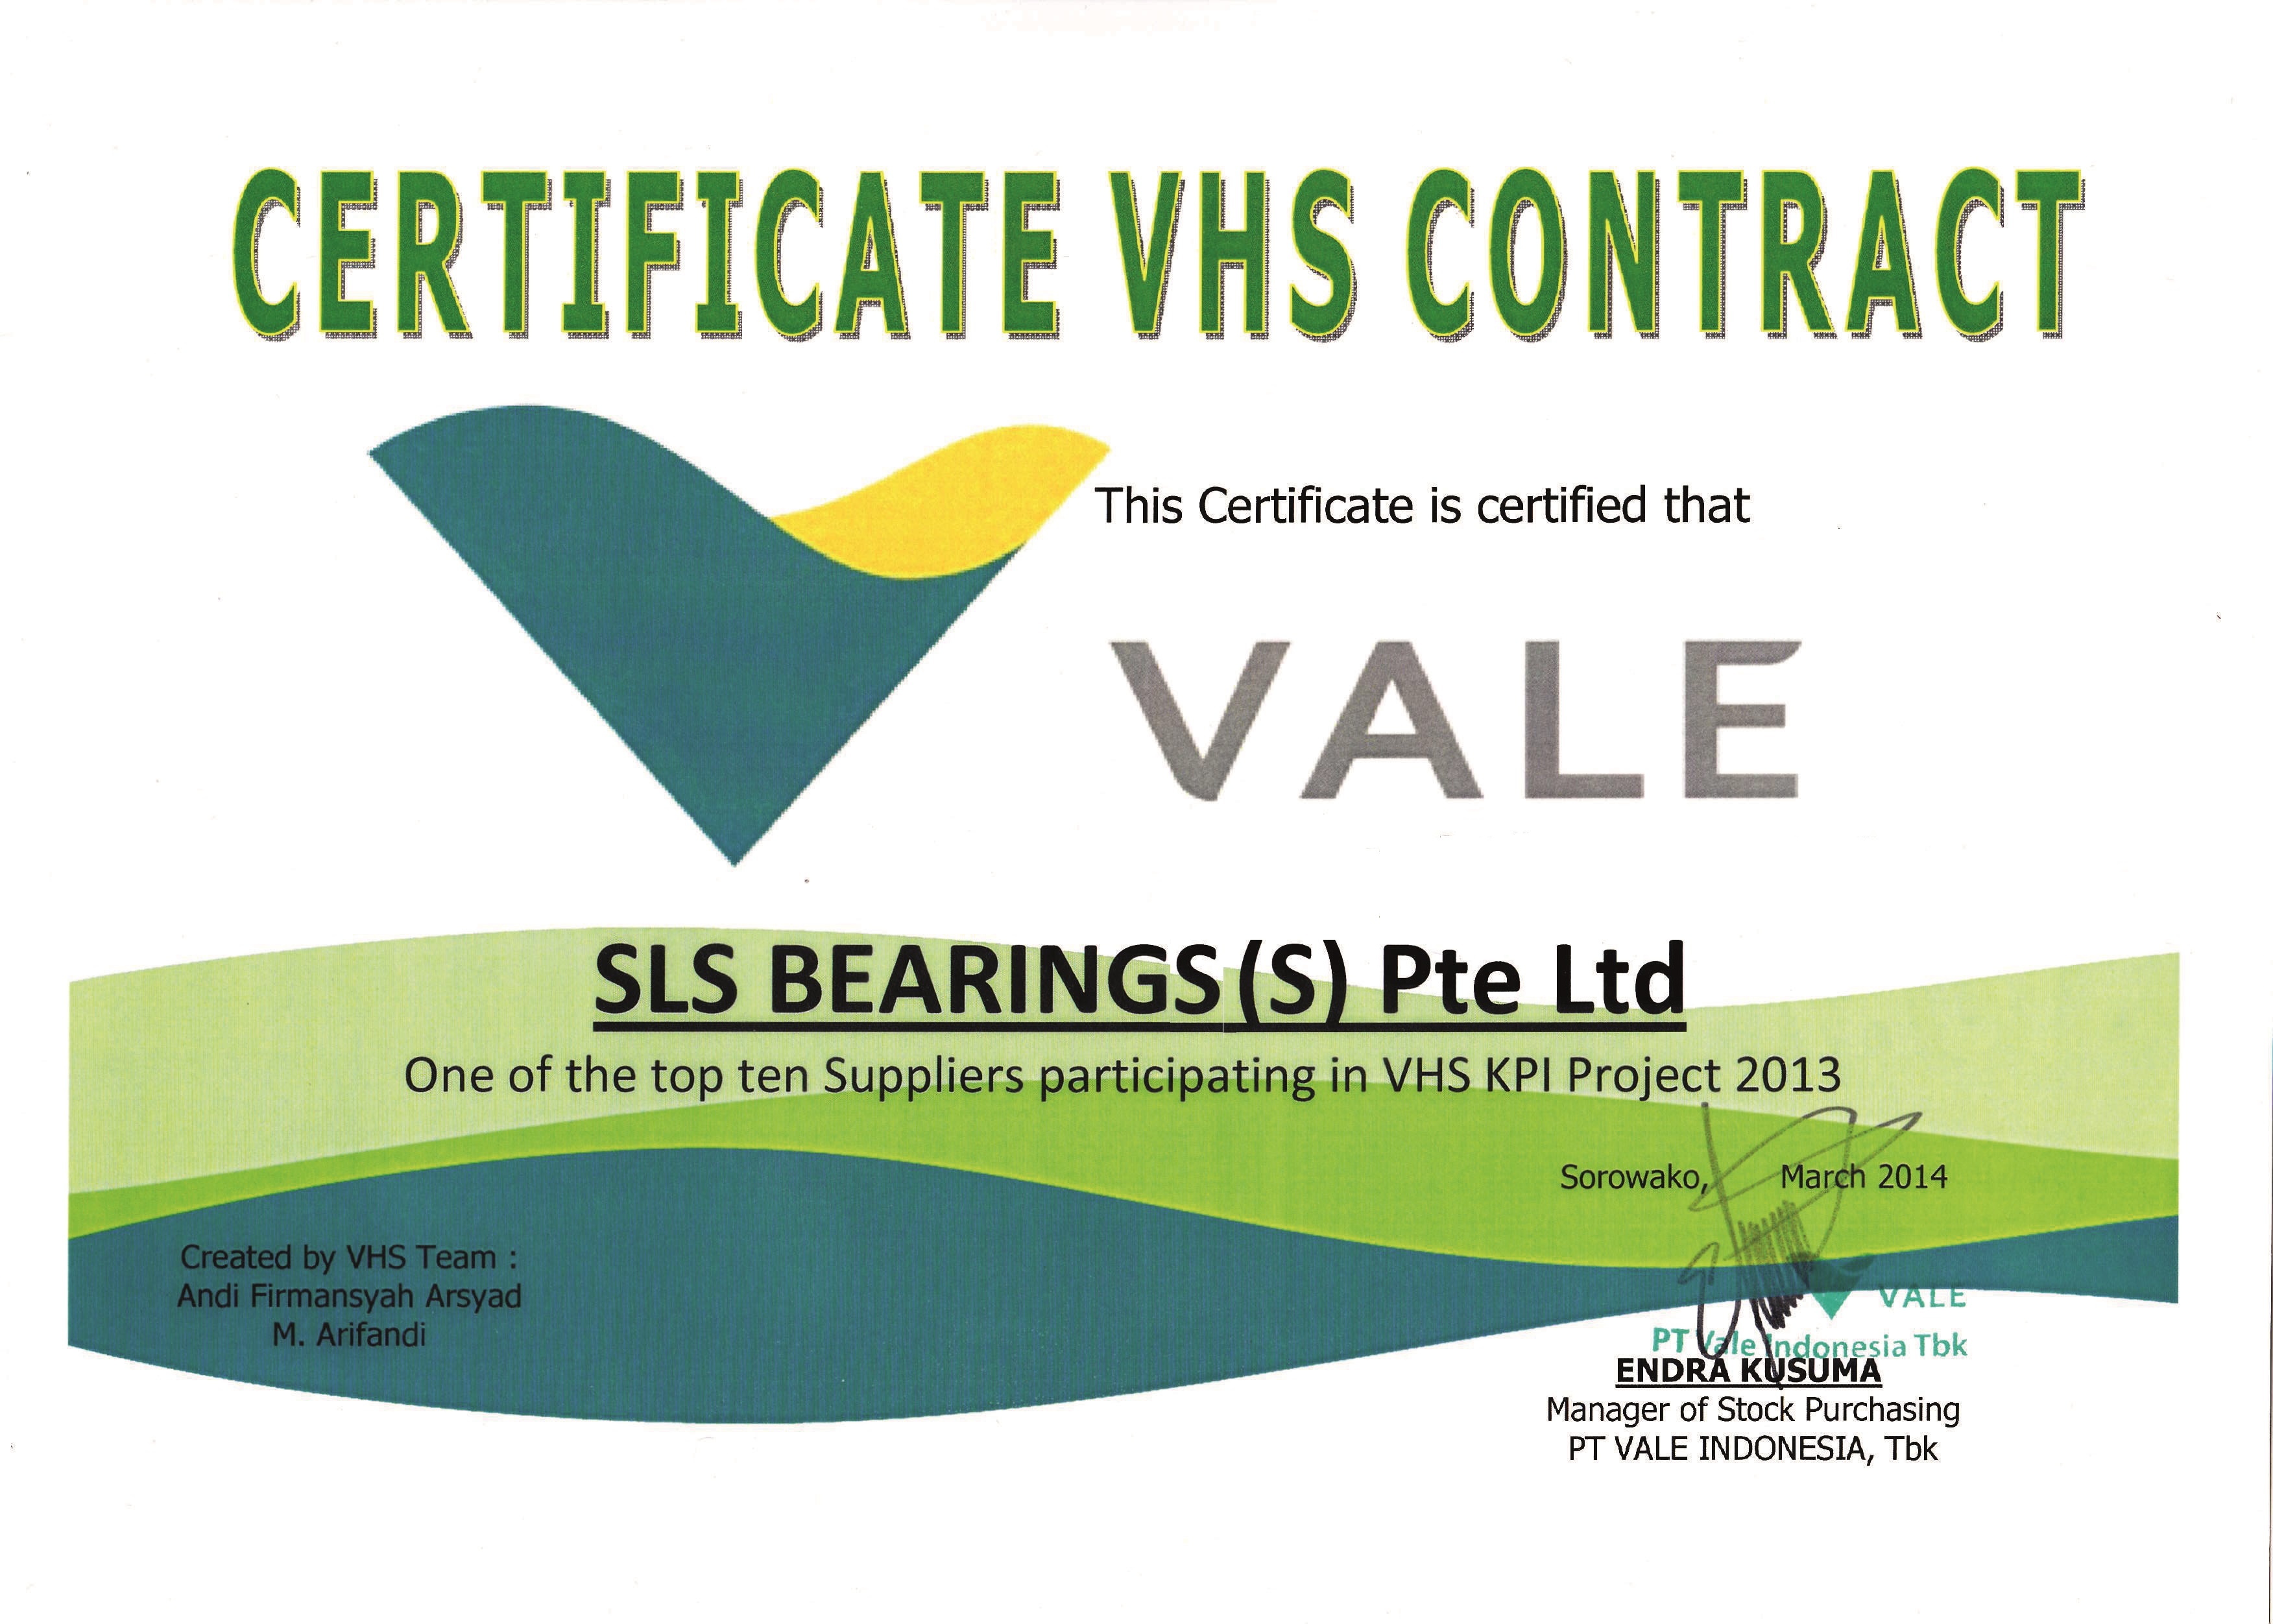 Image shows the VHS certificate awarded to SLS Bearings (S) Pte Ltd